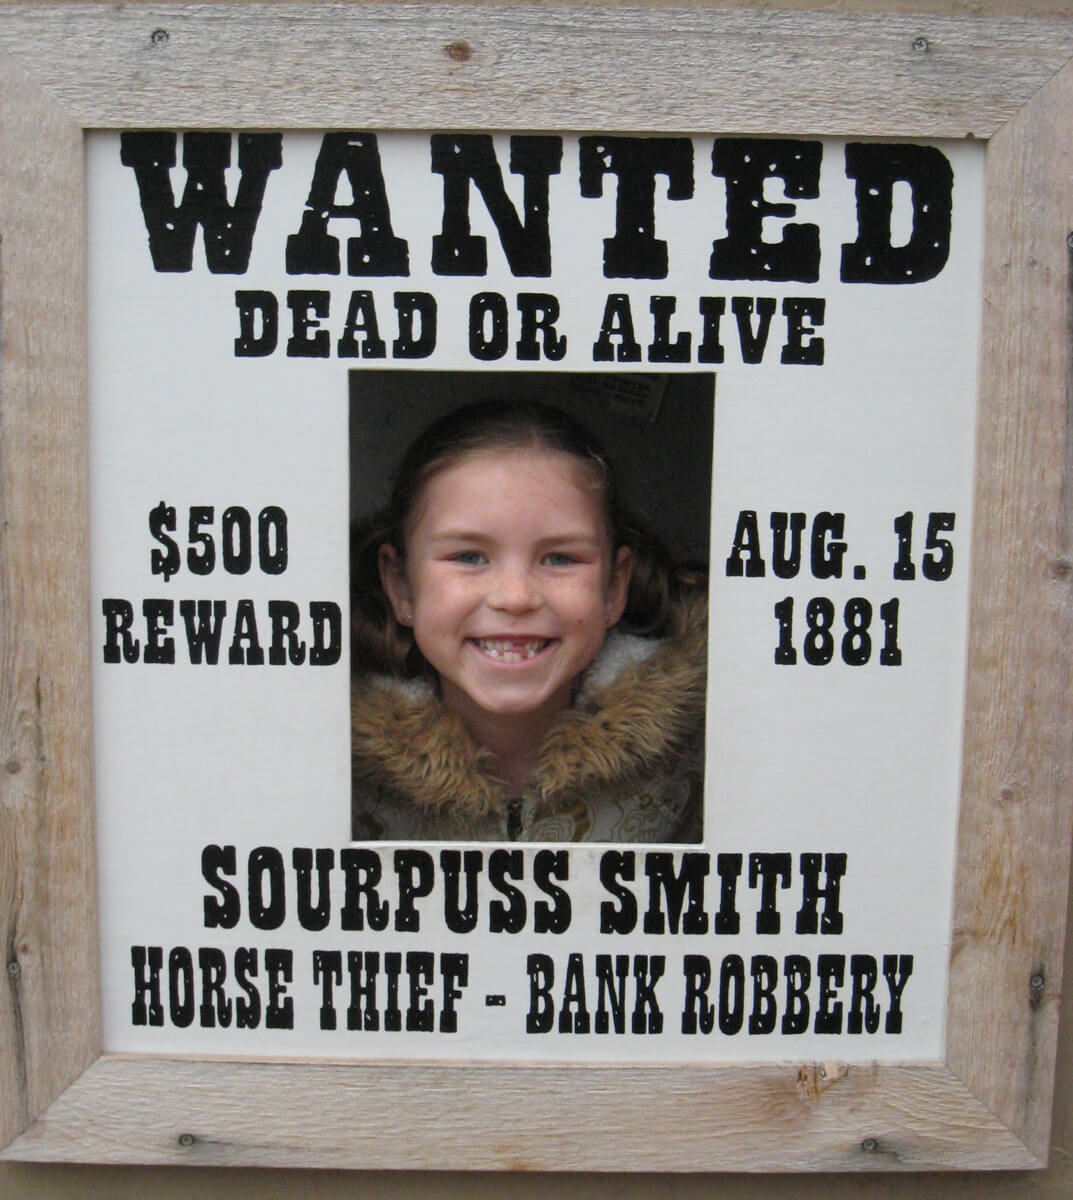 Wanted! A new Tooth!